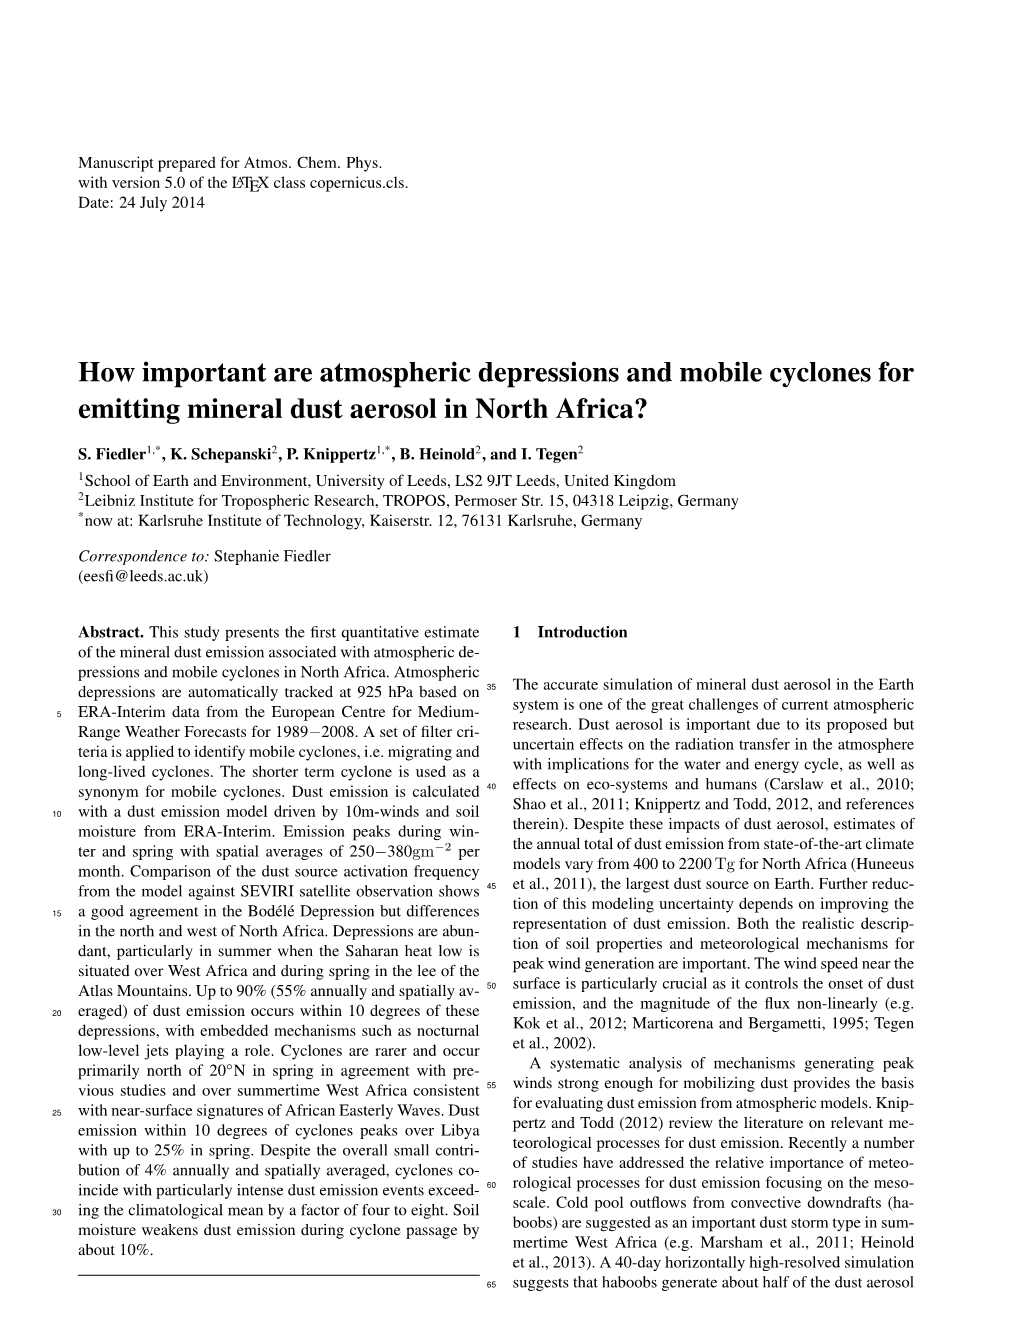 How Important Are Atmospheric Depressions and Mobile Cyclones for Emitting Mineral Dust Aerosol in North Africa?